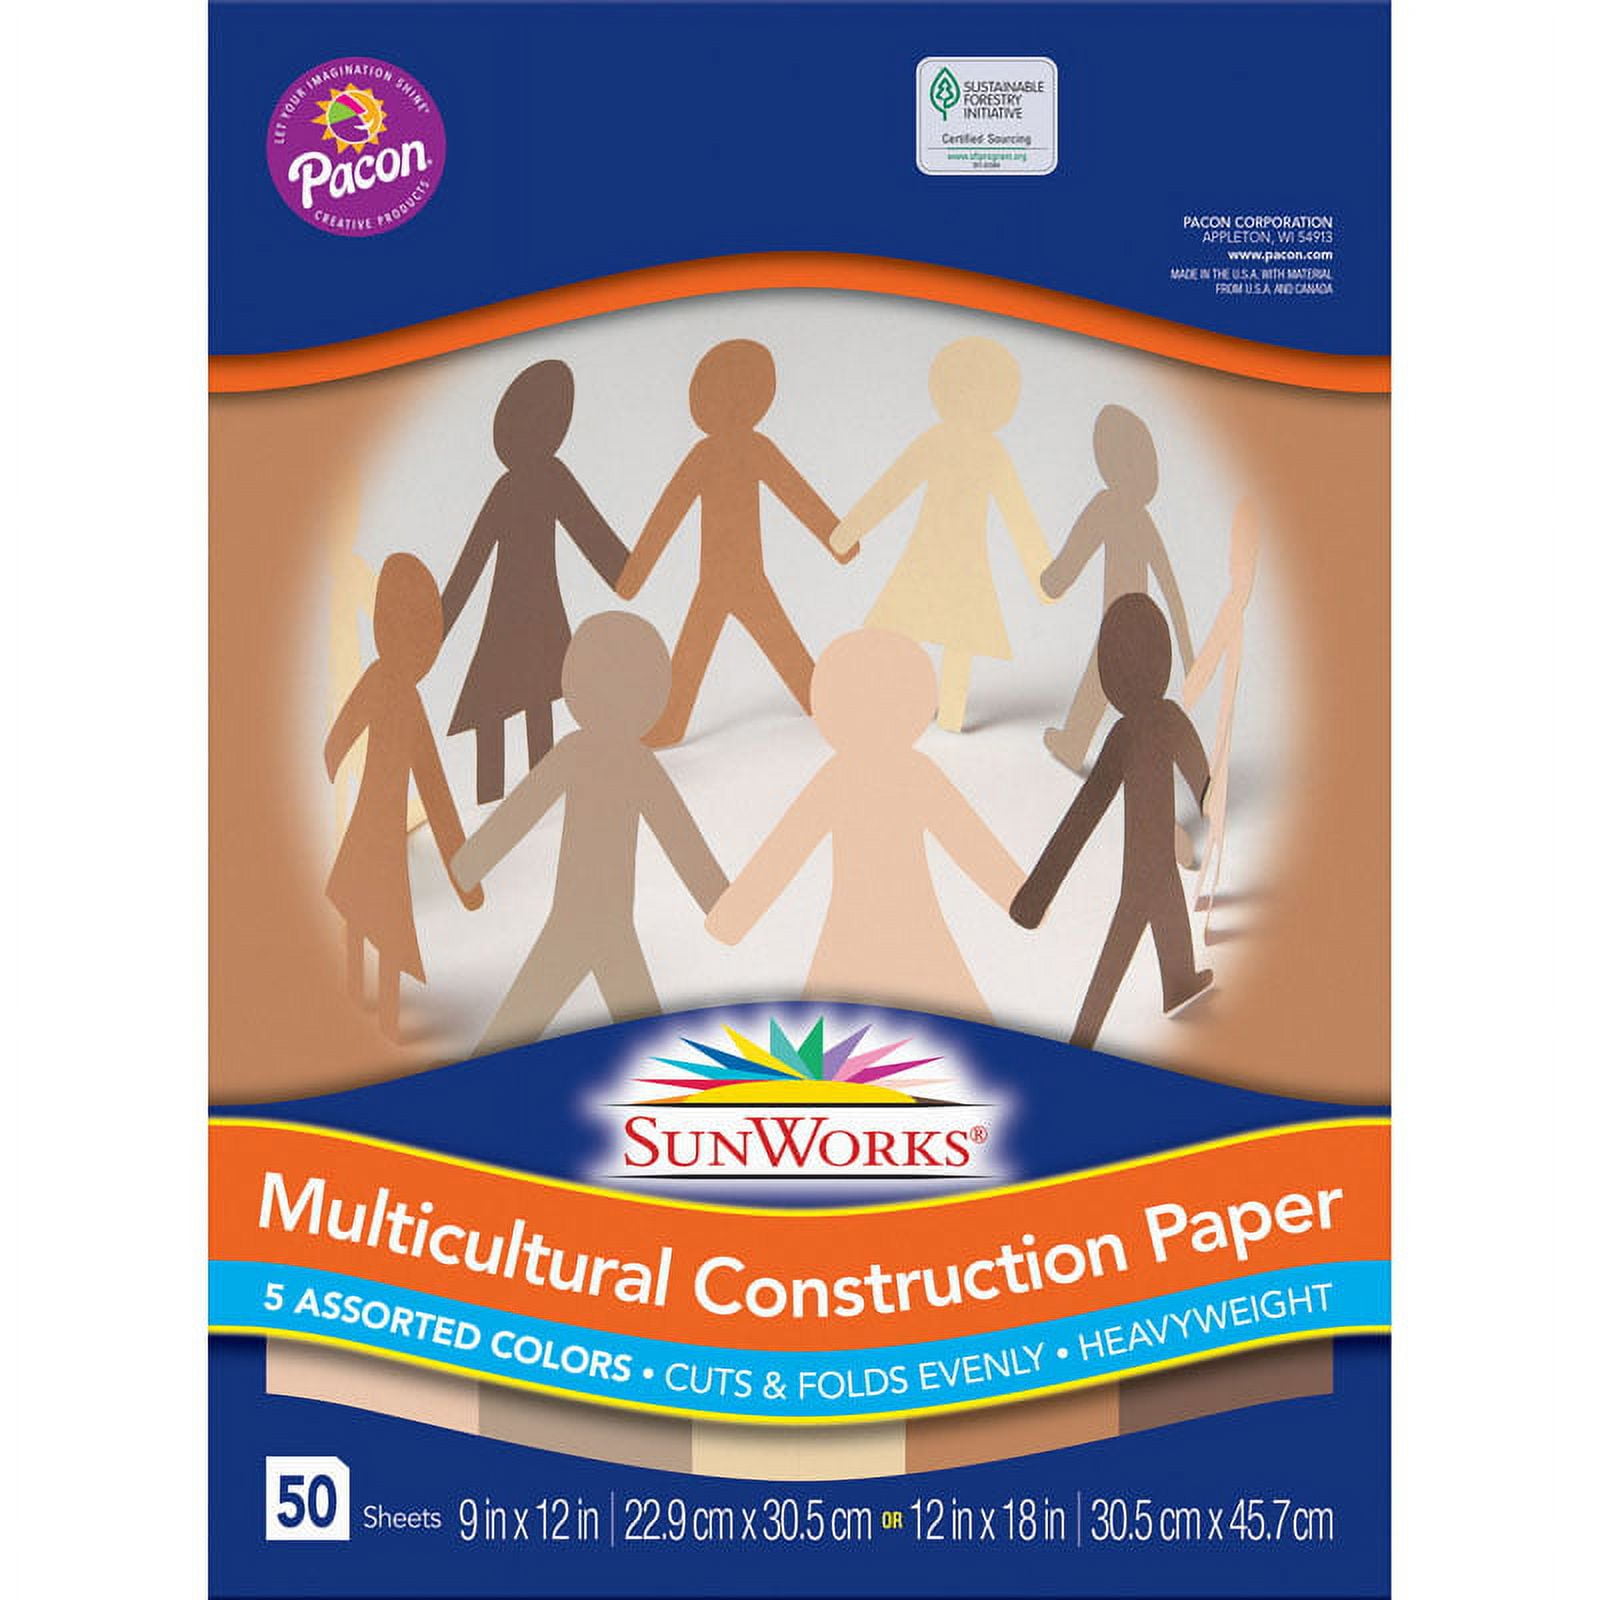 Shades of Me Construction Paper, 5 Assorted Skin Tone Colors, 9 inch x 12 inch, 50 Sheets | Bundle of 10 Packs